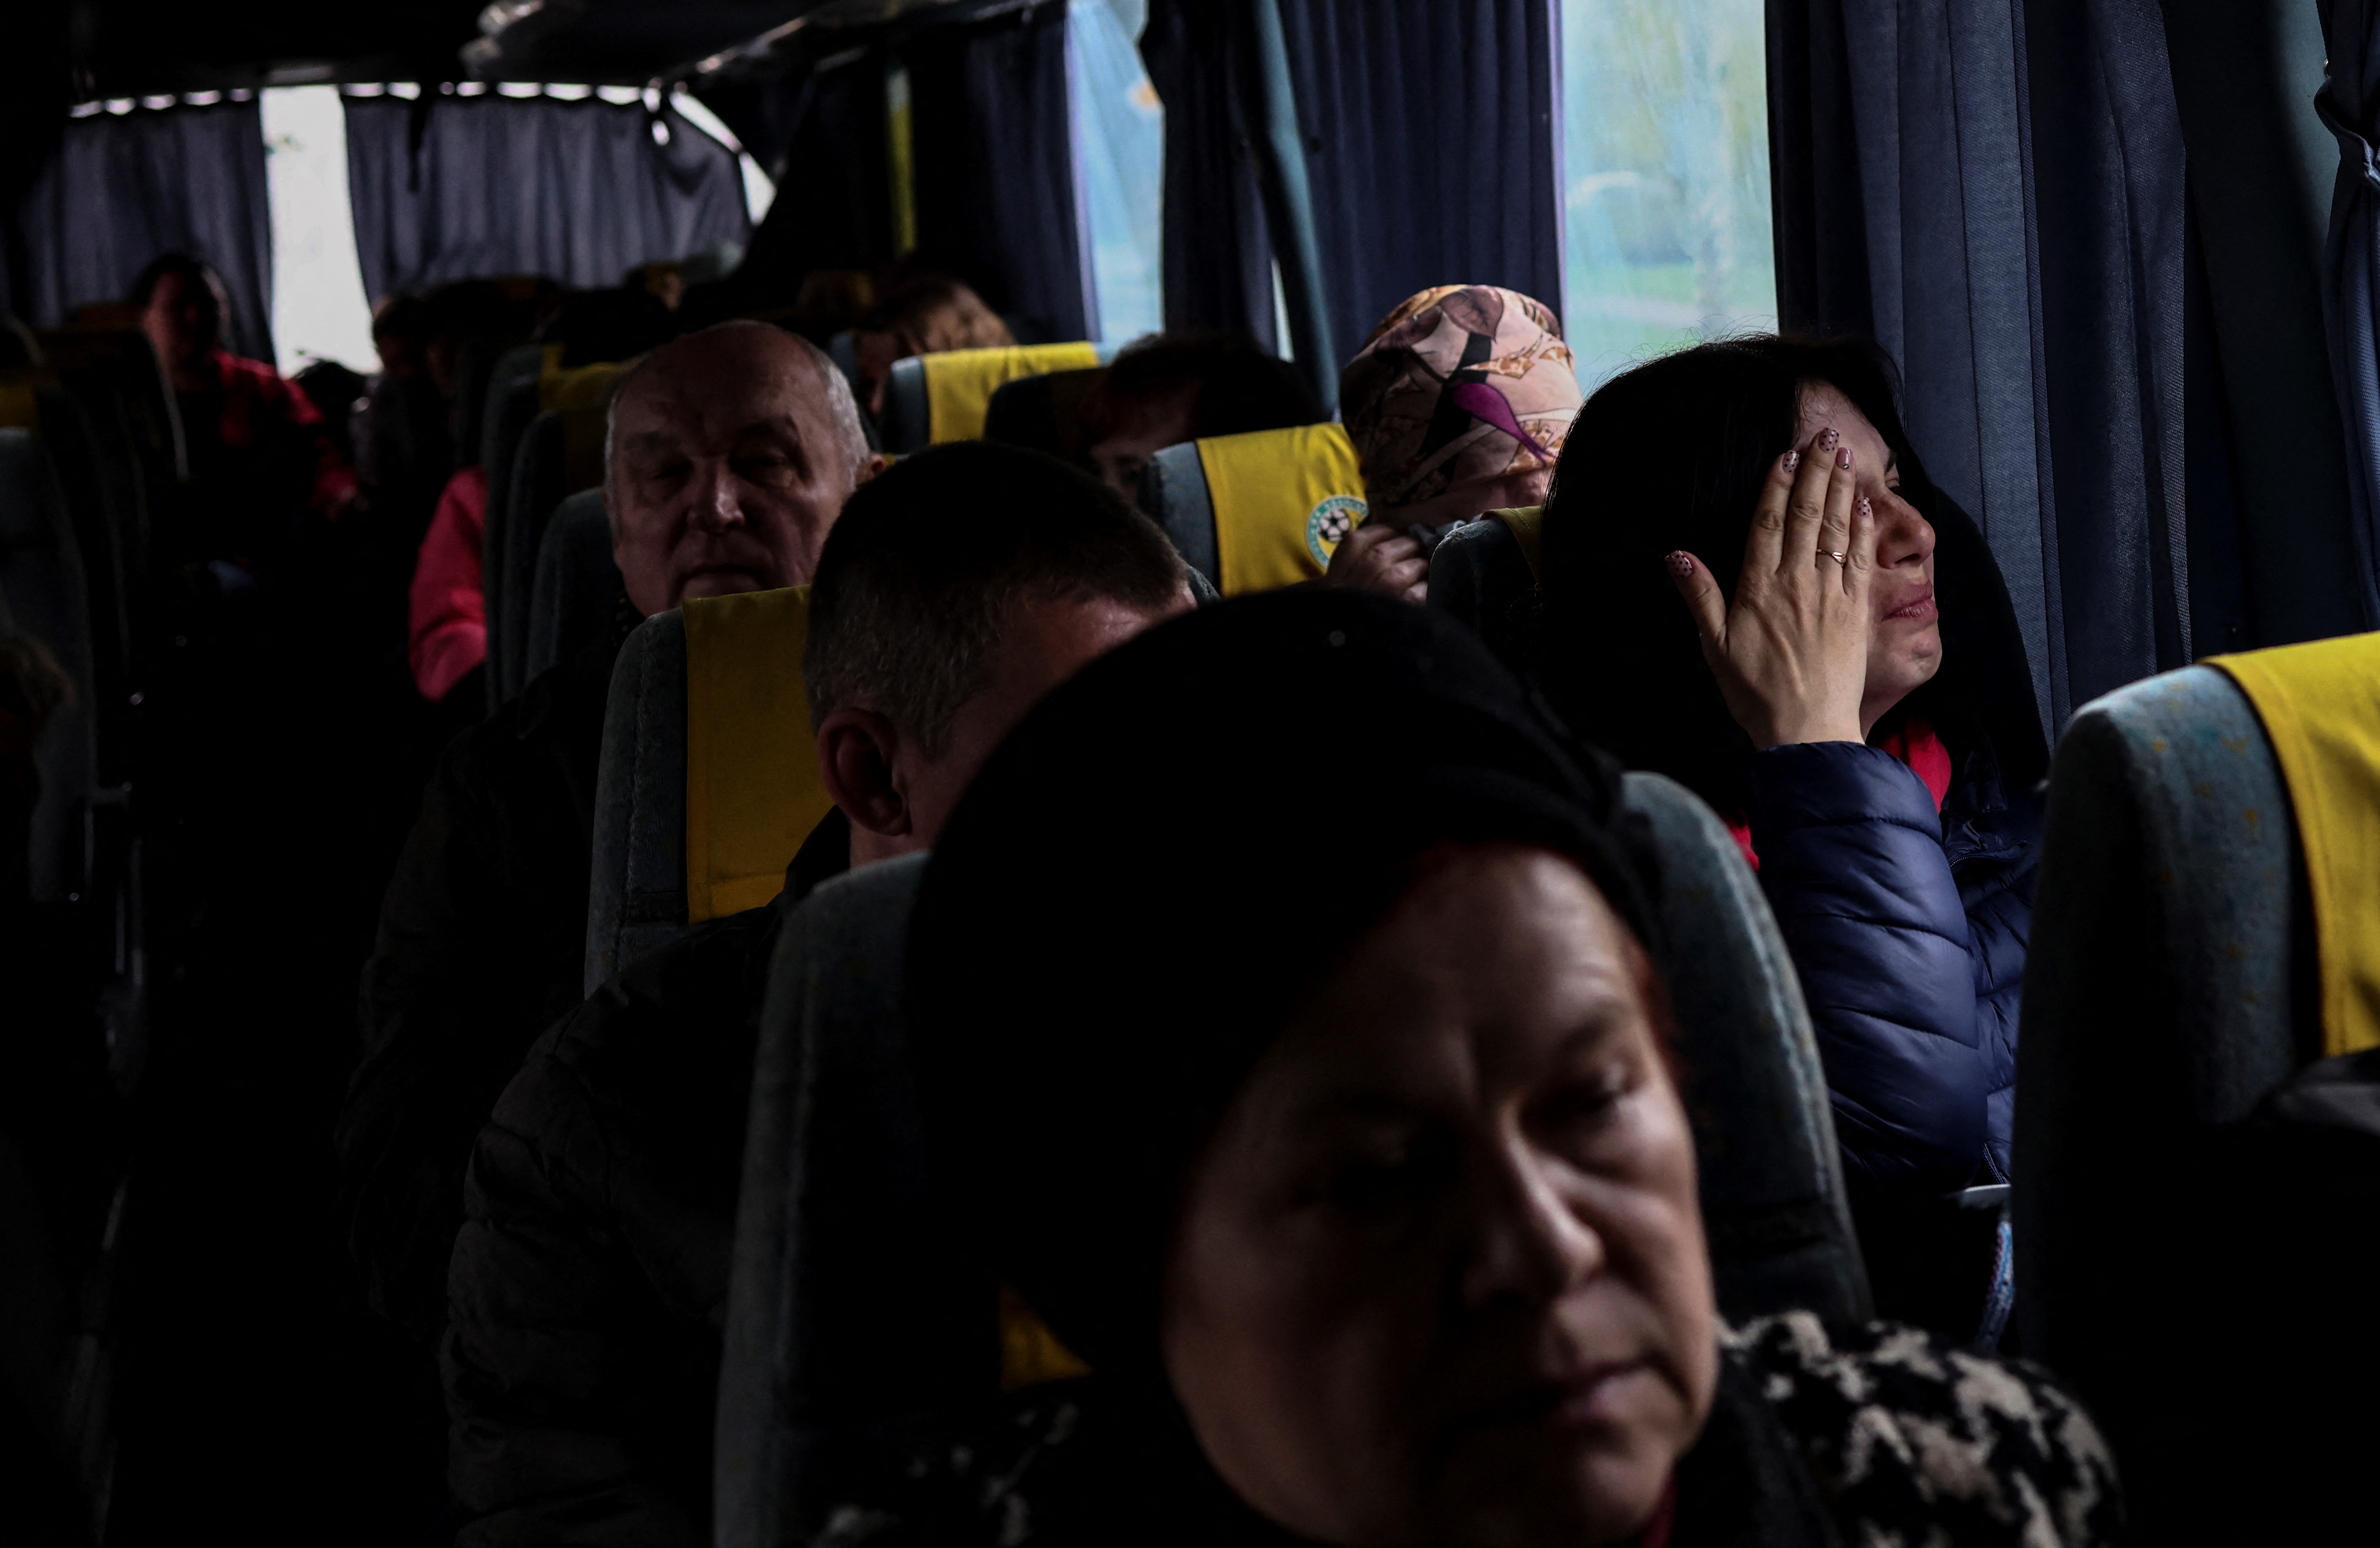 A woman cries as the bus leaves the Slovyansk central station, in the Donbas region on April 12.  